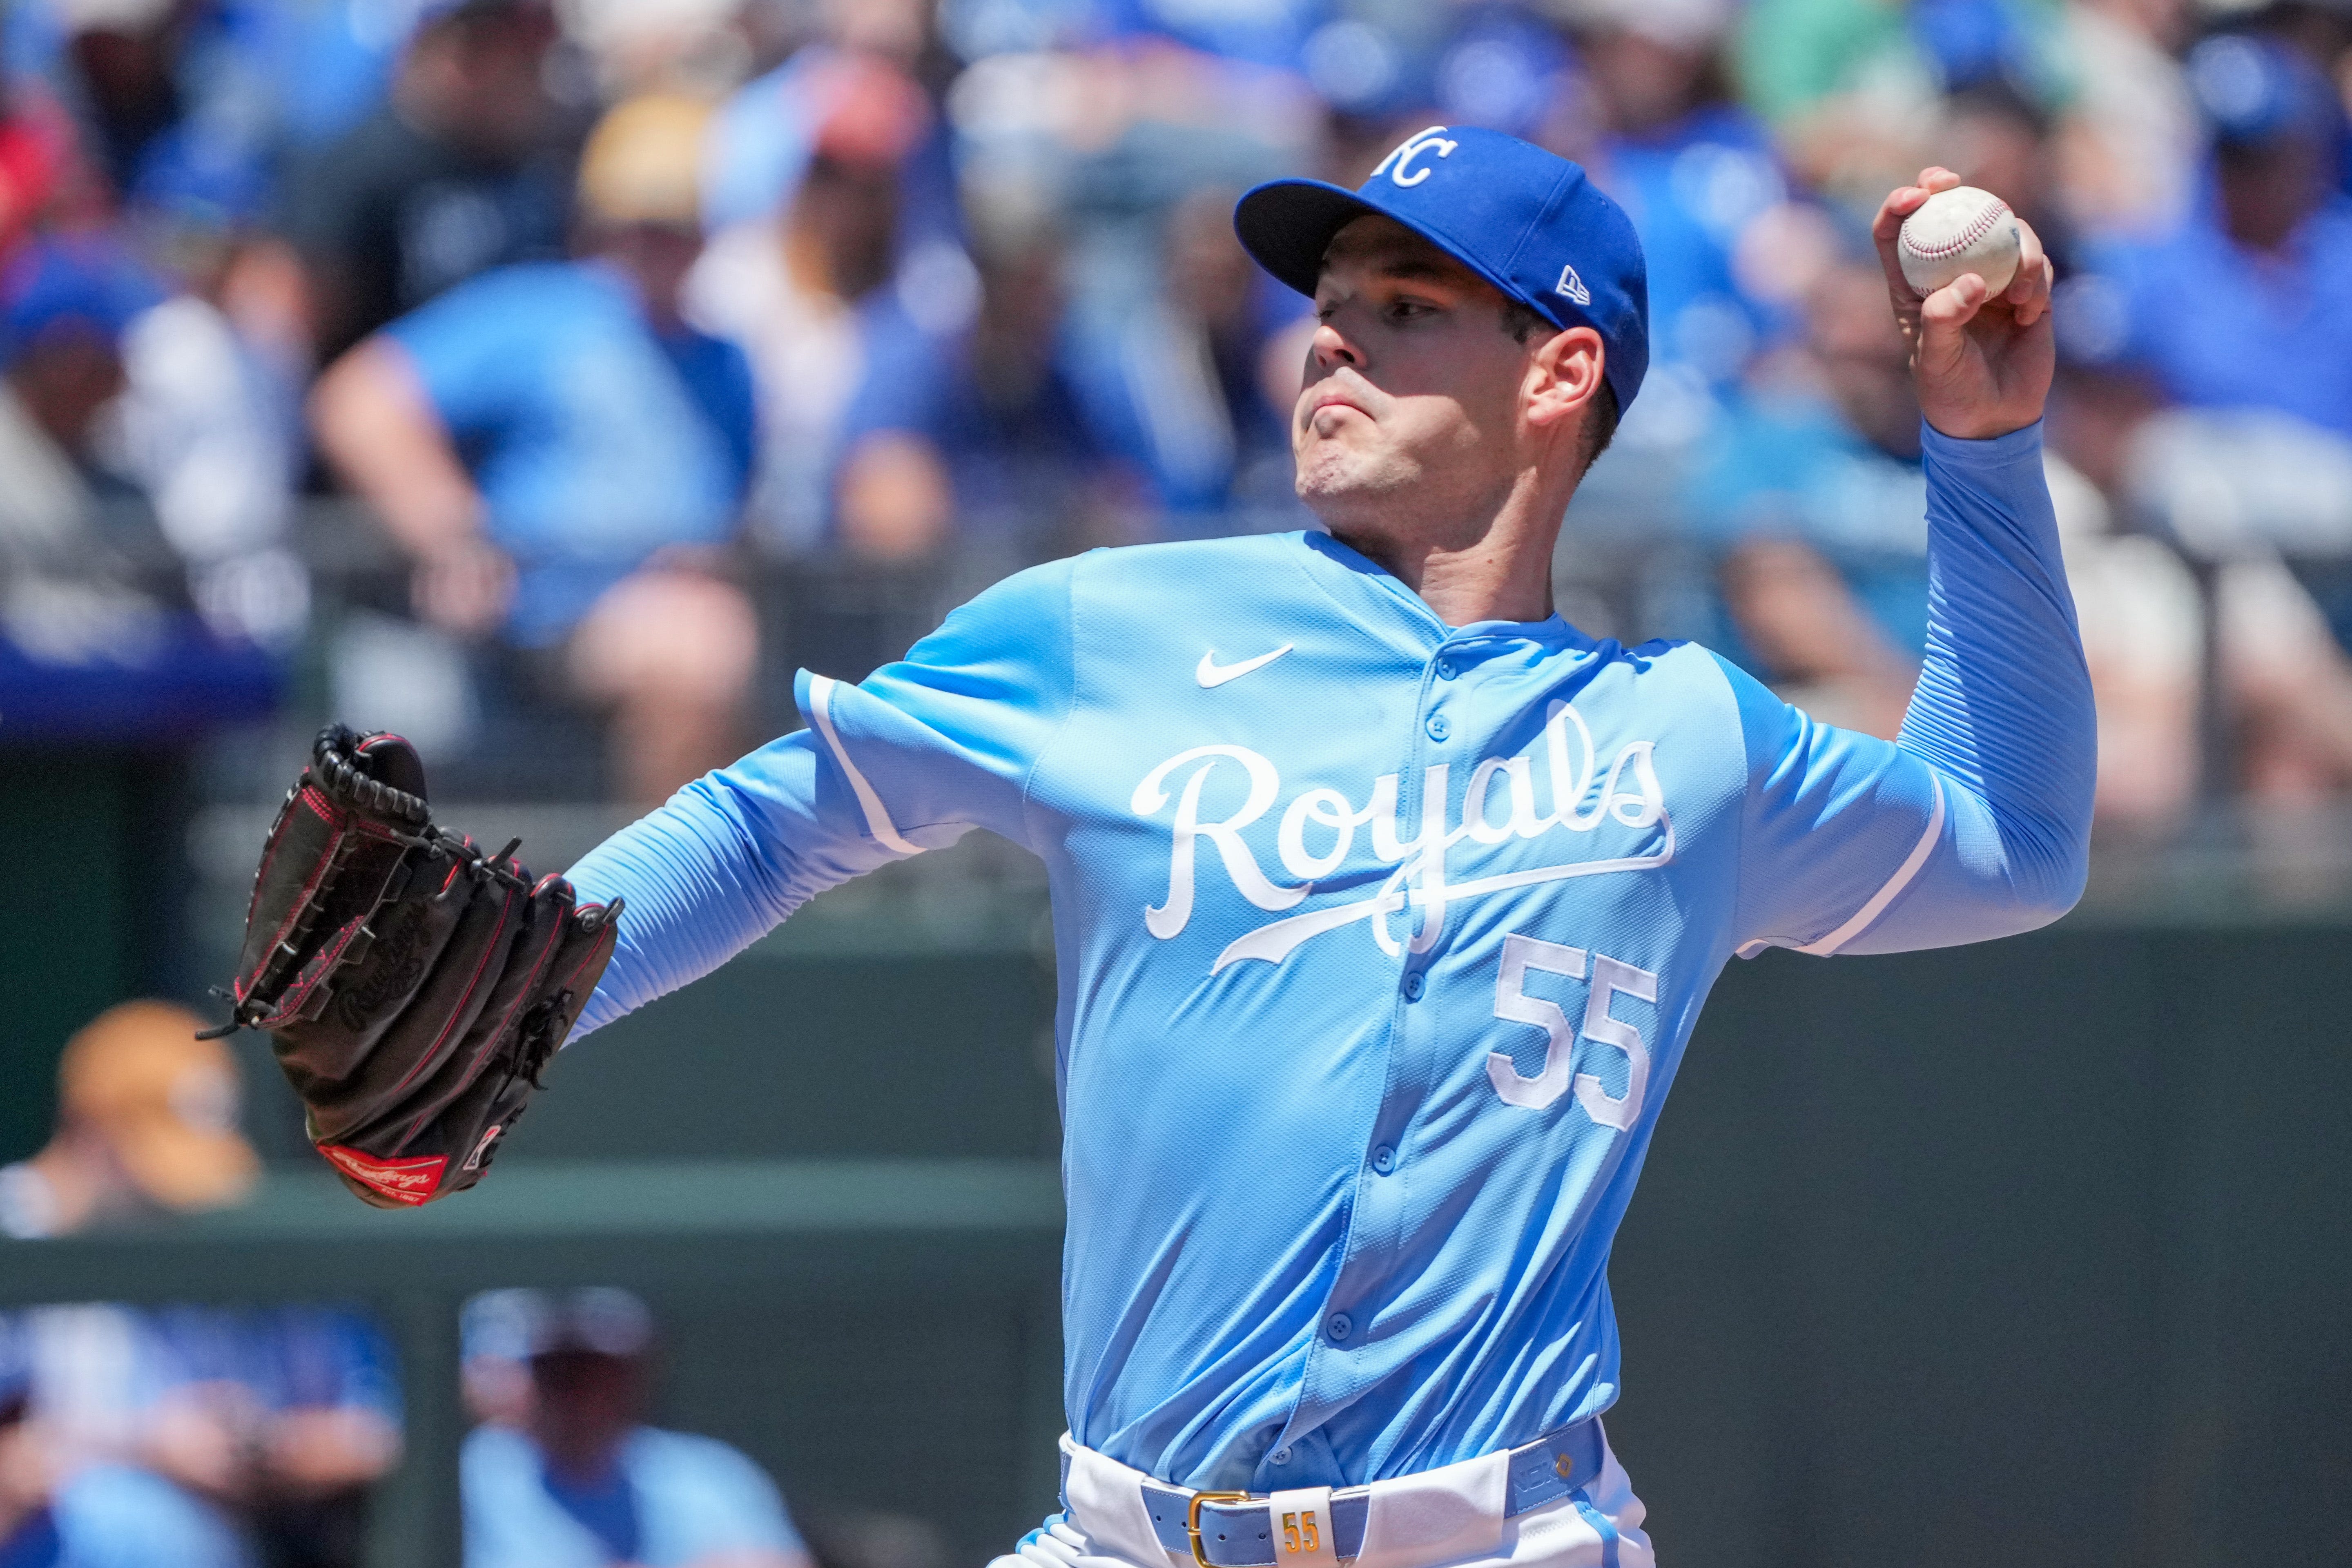 Former NFC, current Kansas City Royals pitcher Cole Ragans selected to MLB All-Star Game